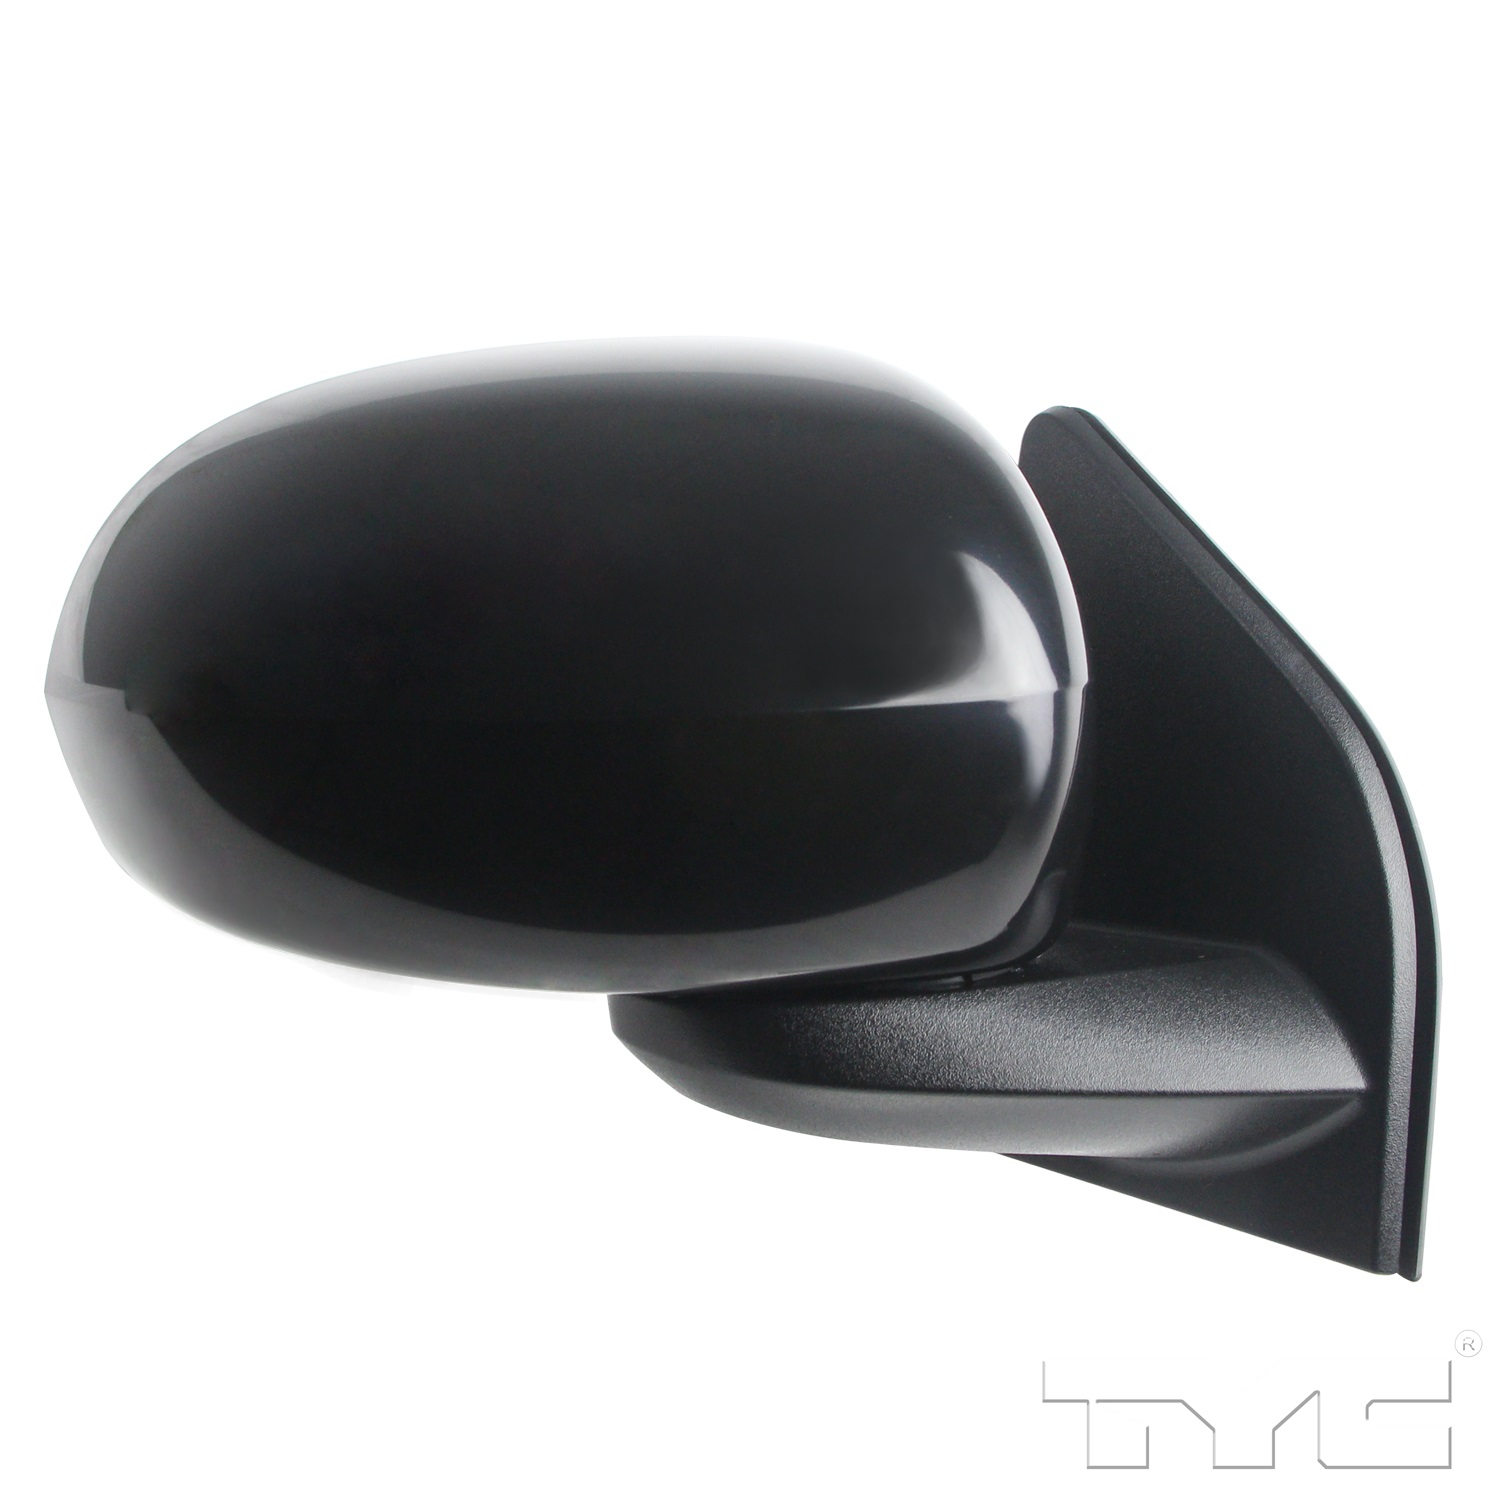 Aftermarket MIRRORS for JEEP - COMPASS, COMPASS,16-17,RT Mirror outside rear view